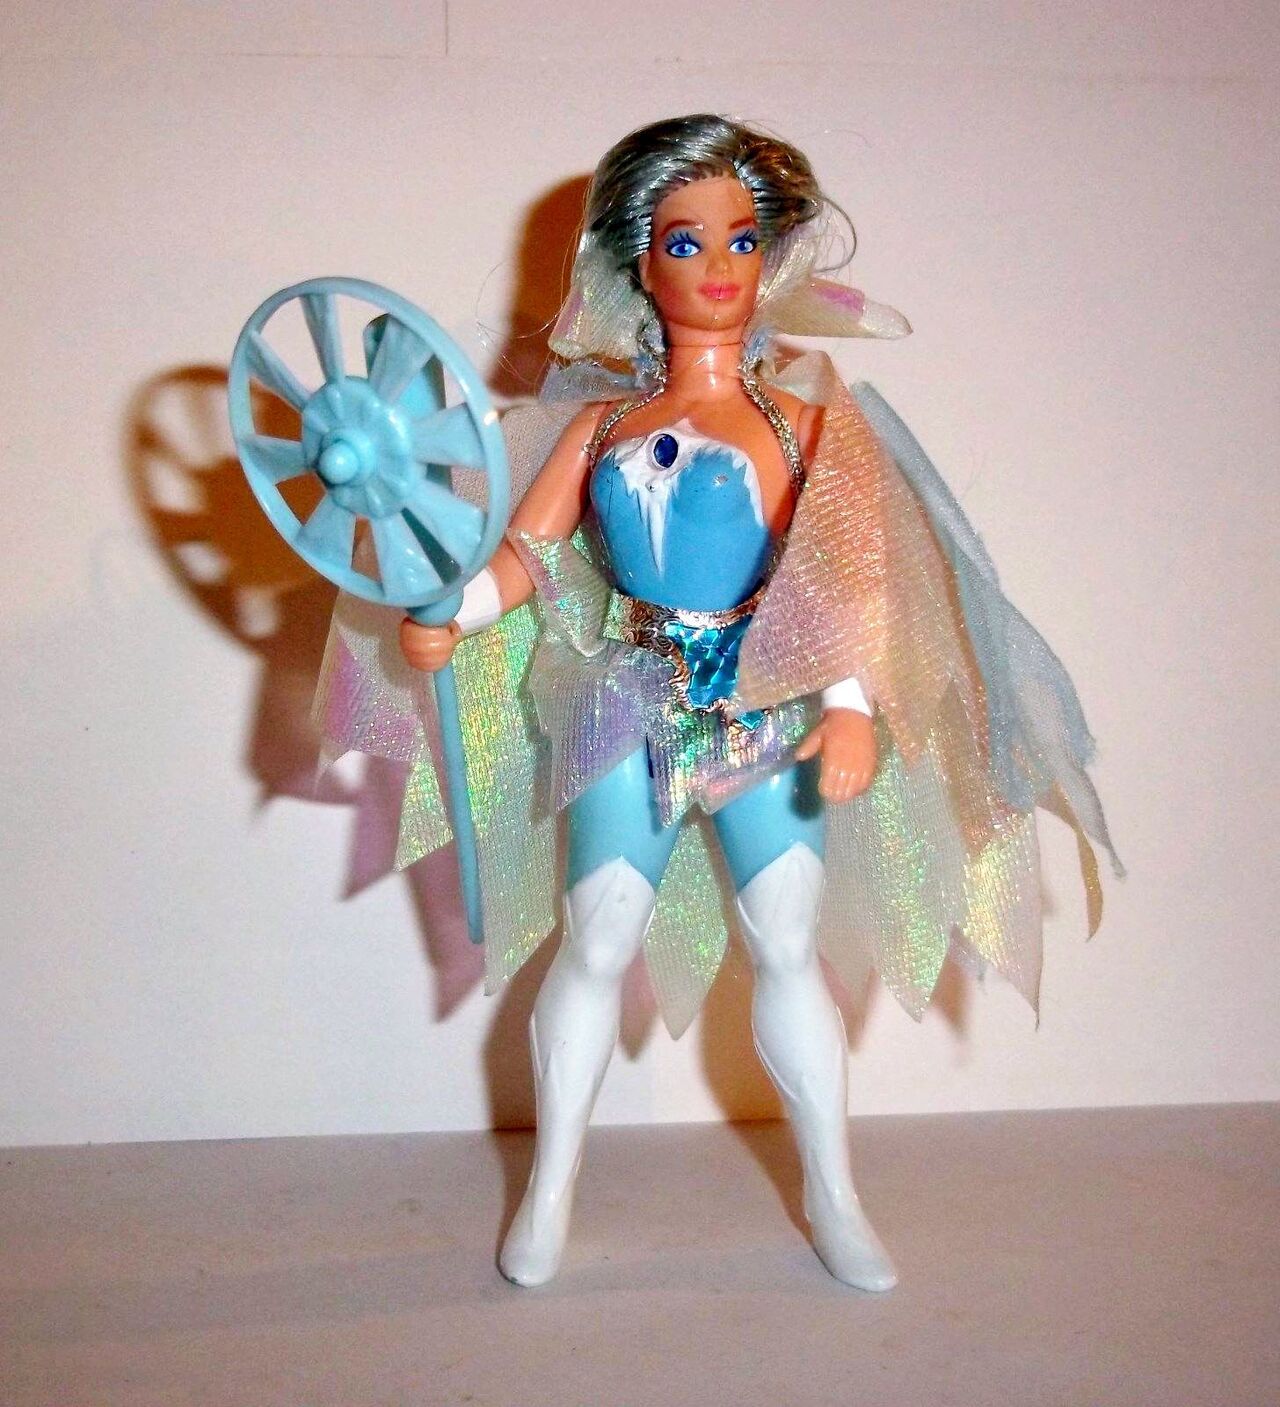 She-Ra: Princess of Power (1985) - (figures, dolls, toys and objects) 11